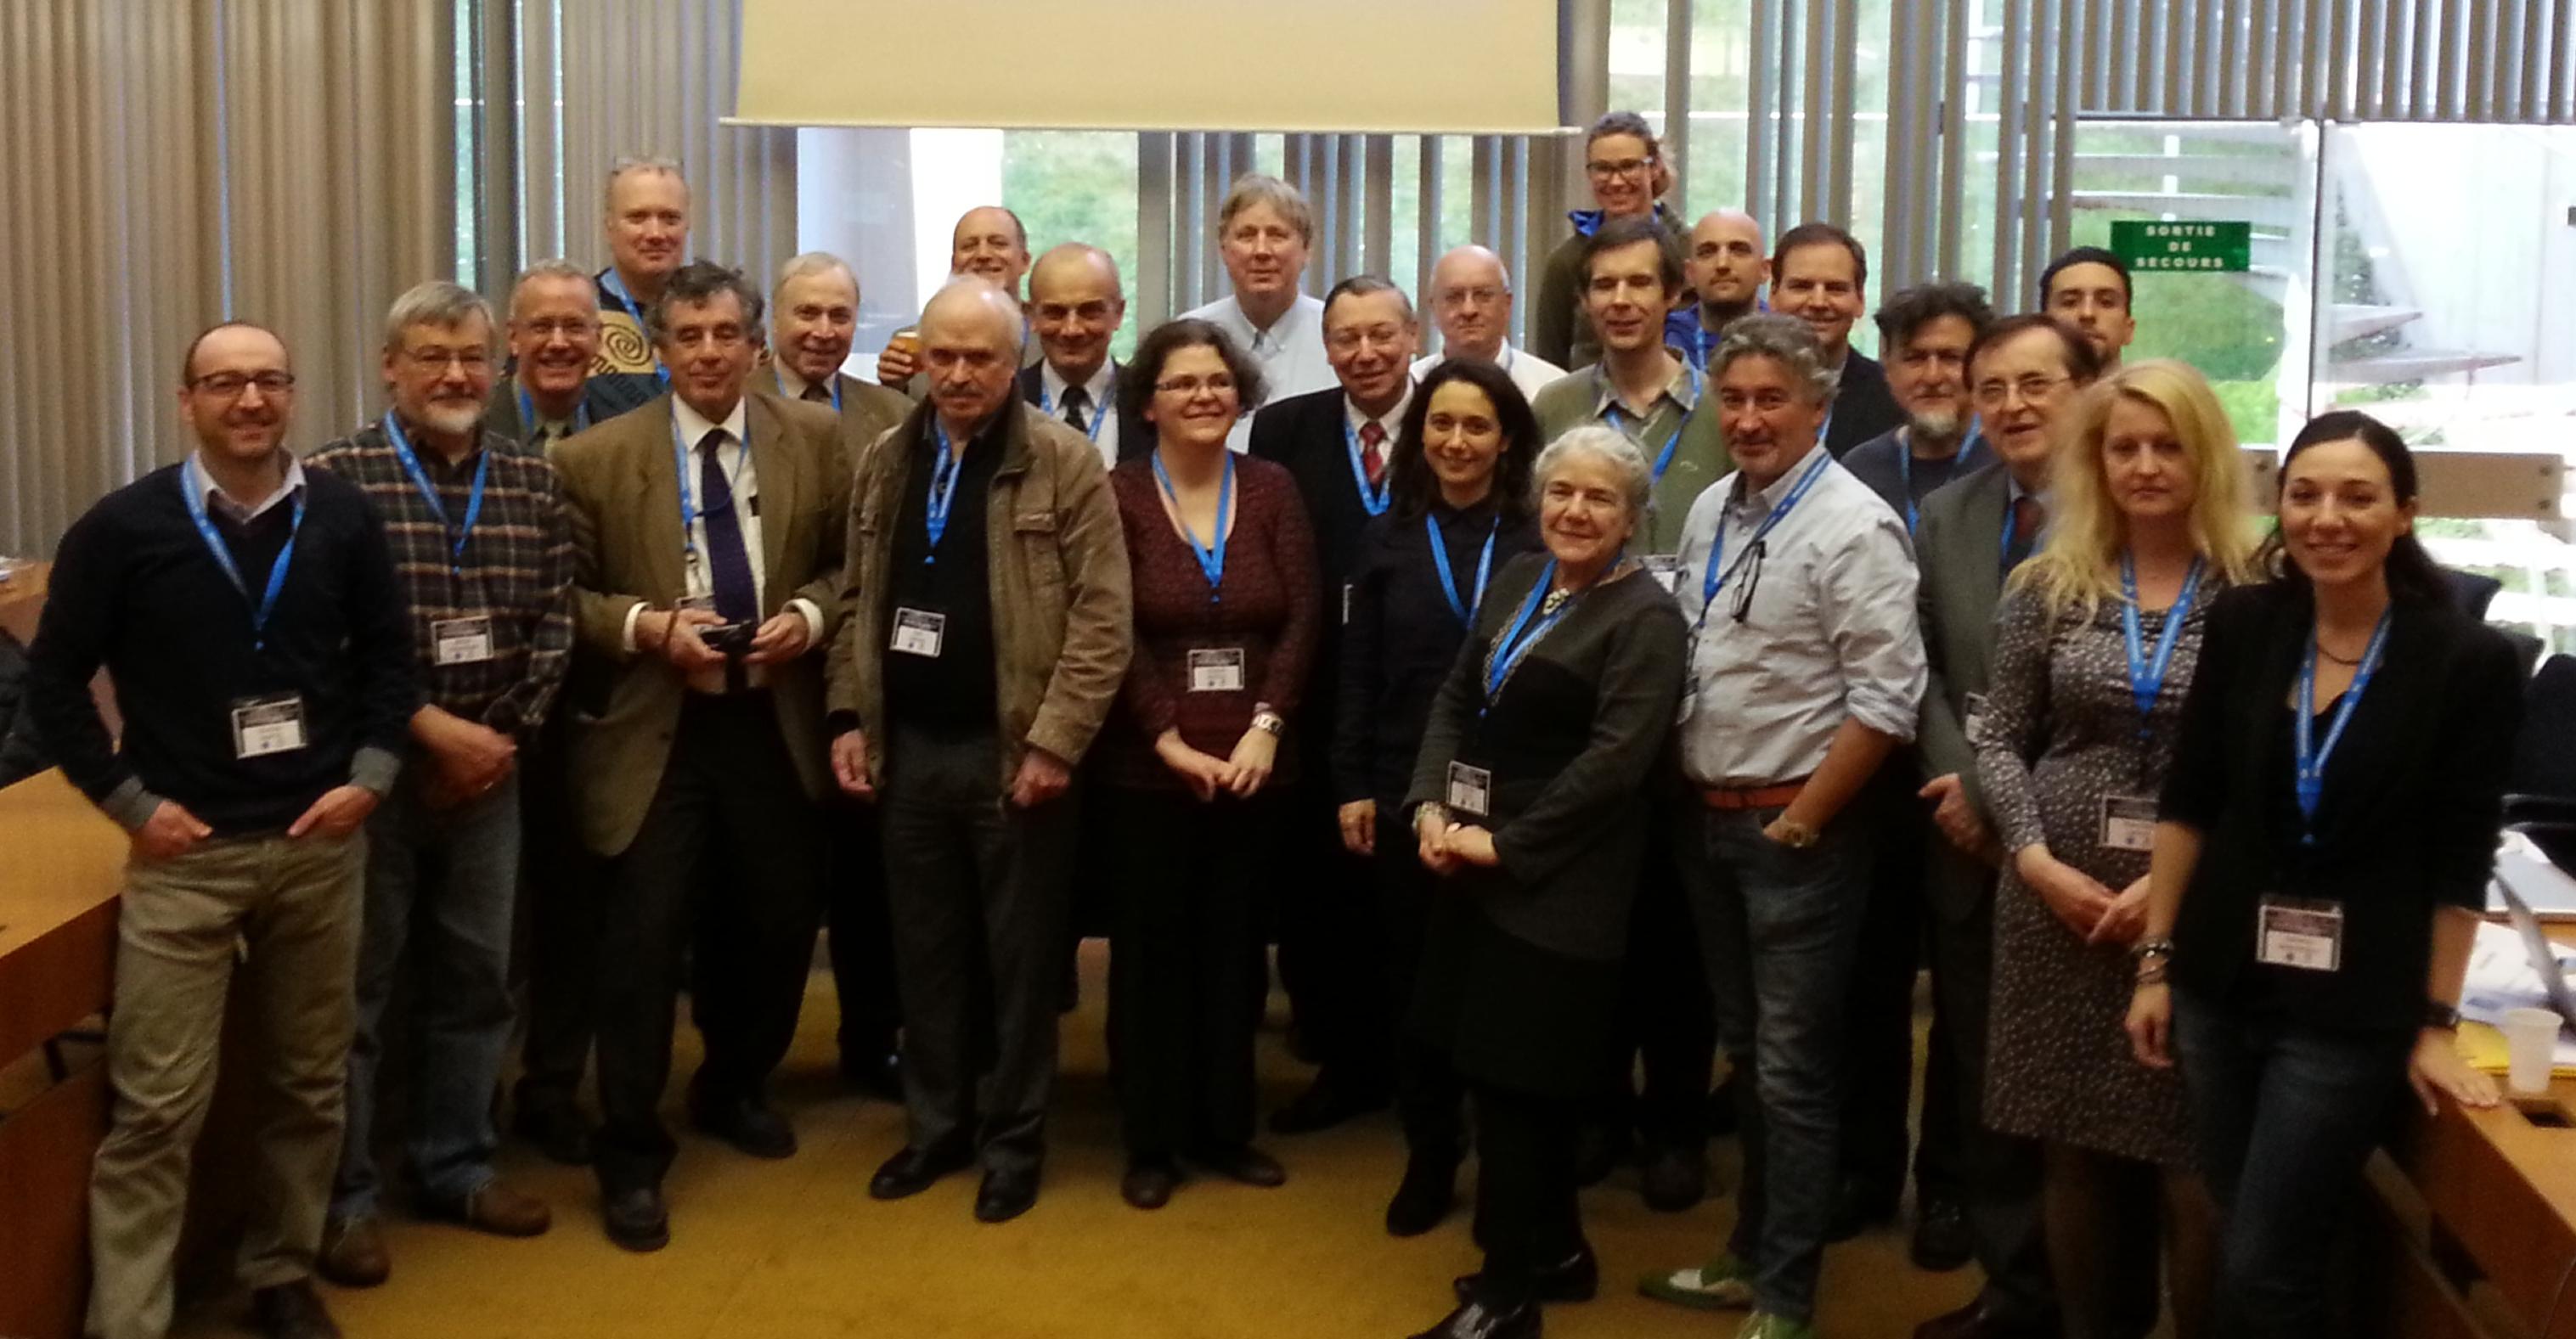 5th IAA Search for Life Signatures Symposium participants